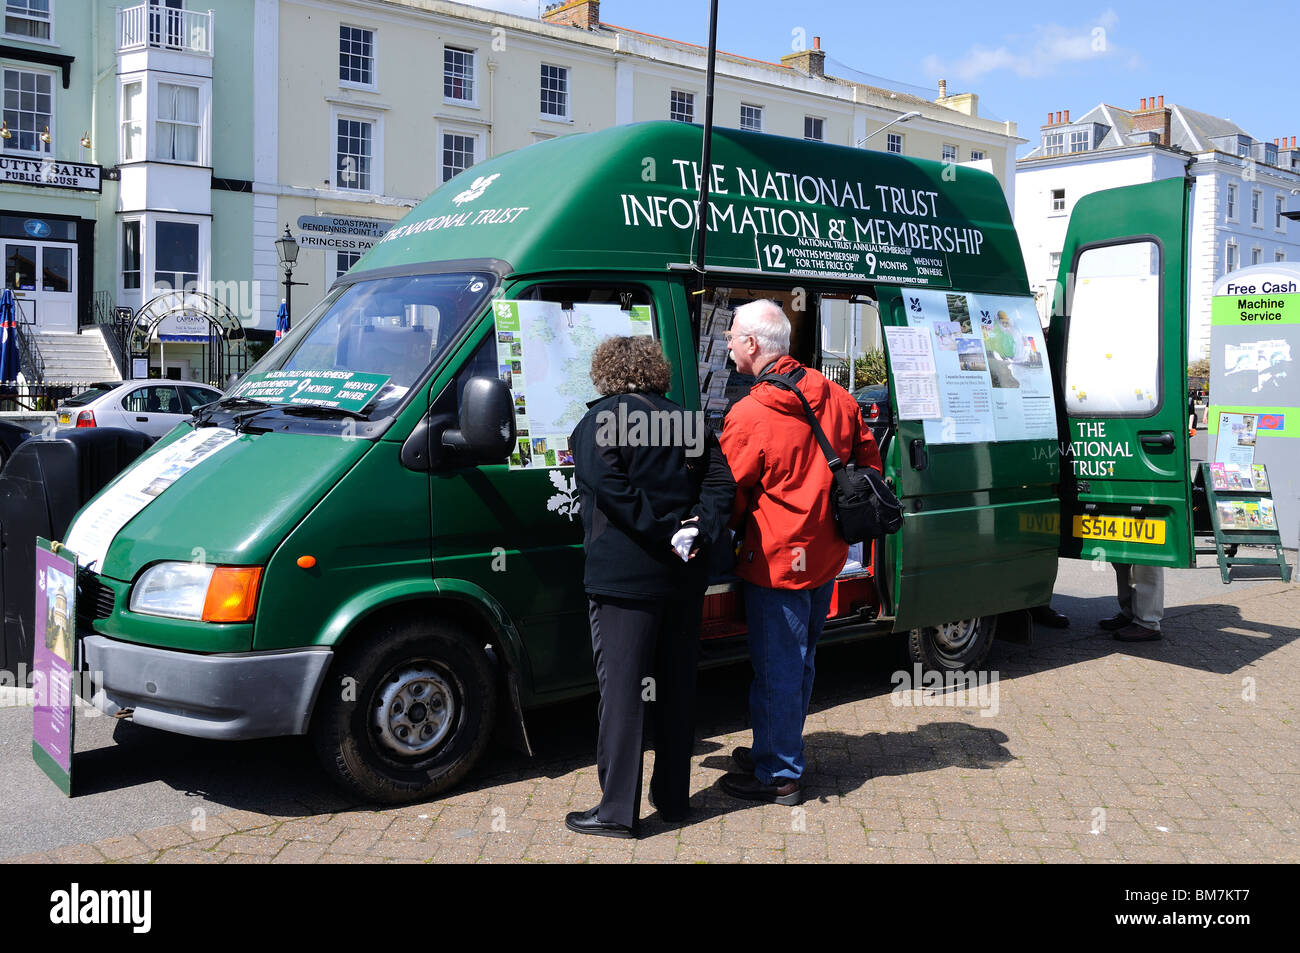 a man and woman looking at joining information on a national trust sales van in falmouth, cornwall, uk Stock Photo